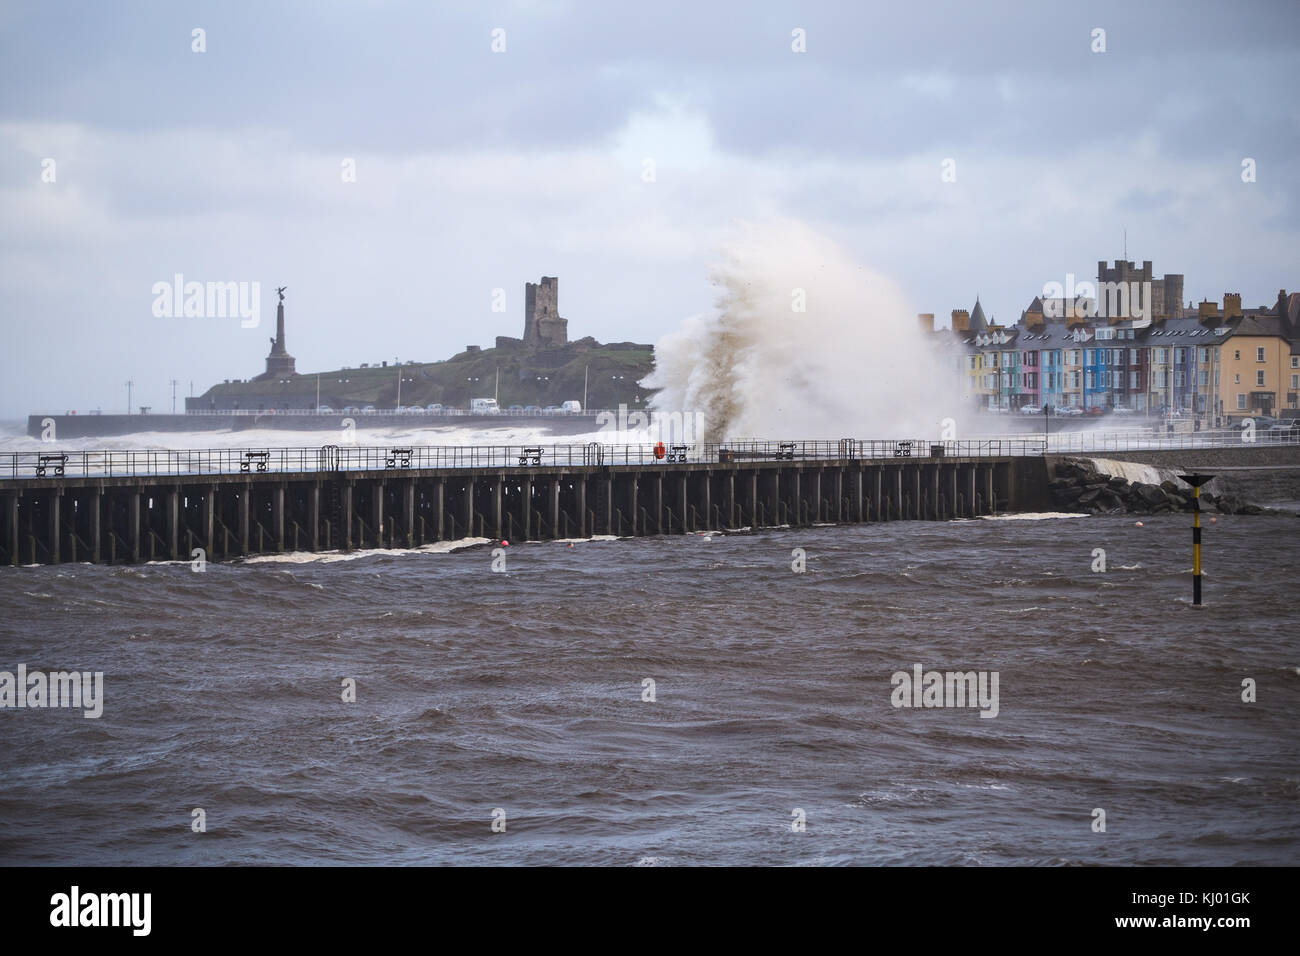 Aberystwyth, Ceredigion, UK. 23rd Nov, 2017. UK Weather. For a second day of high winds and heavy weather, large waves hit the sea defences at Aberystwyth, mid Wales. Stock Photo